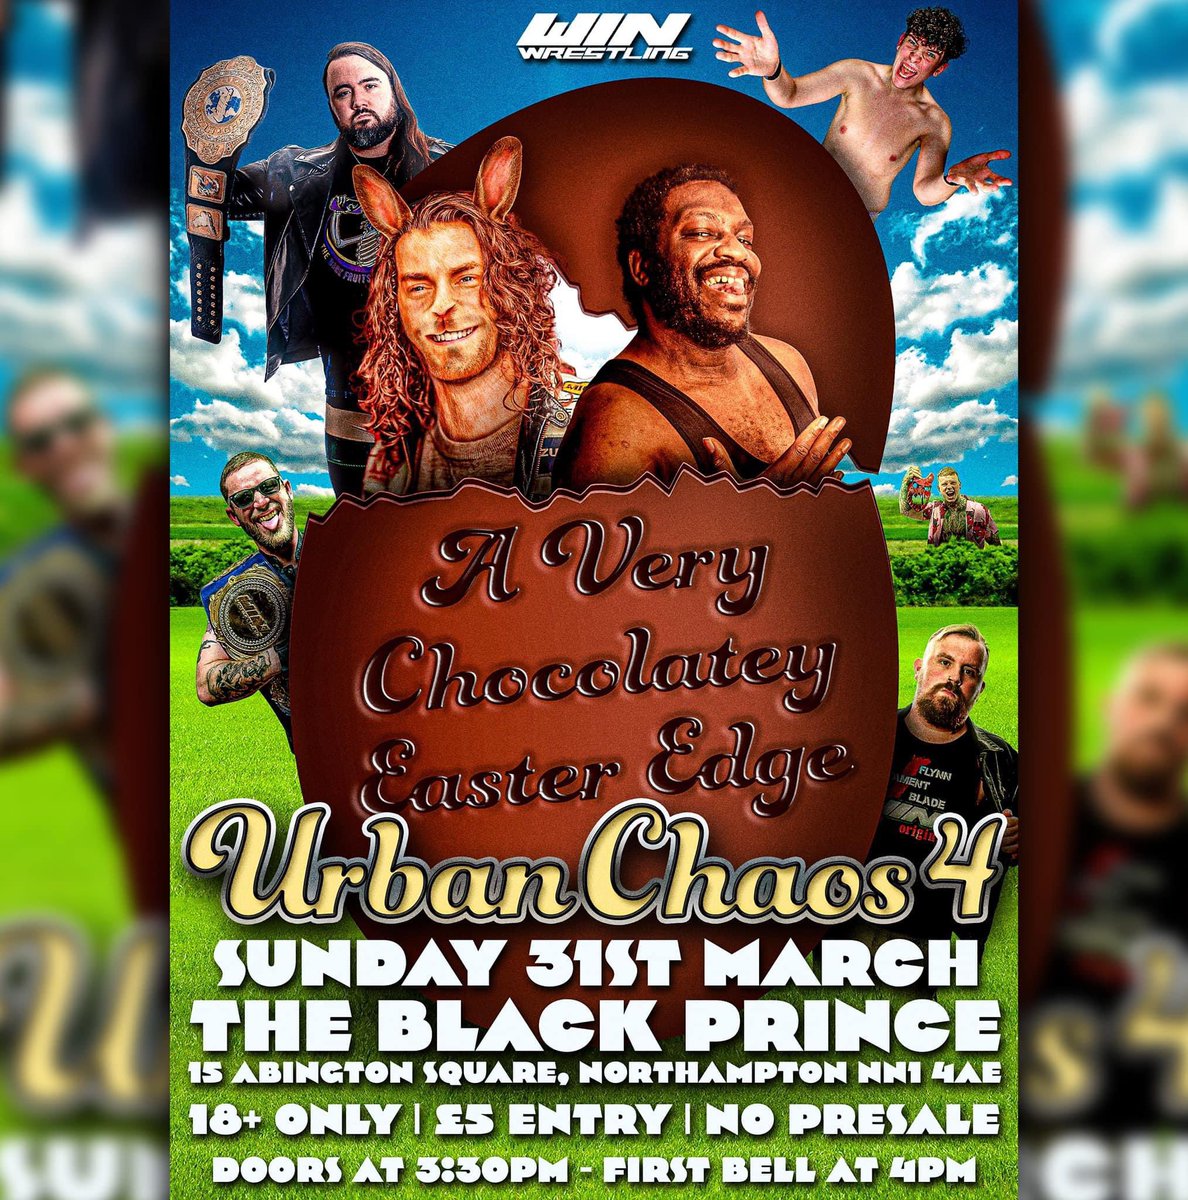 THIS SUNDAY @WIN_Wrestling make their return for what may be one of their most stacked 18+ cards to date!! The main event is scheduled for the WIN Heavyweight Championship with the Dark Fruits Daddy David Grant taking on the Body Mod God Alister Sixx in a TABLES MATCH! £5 entry